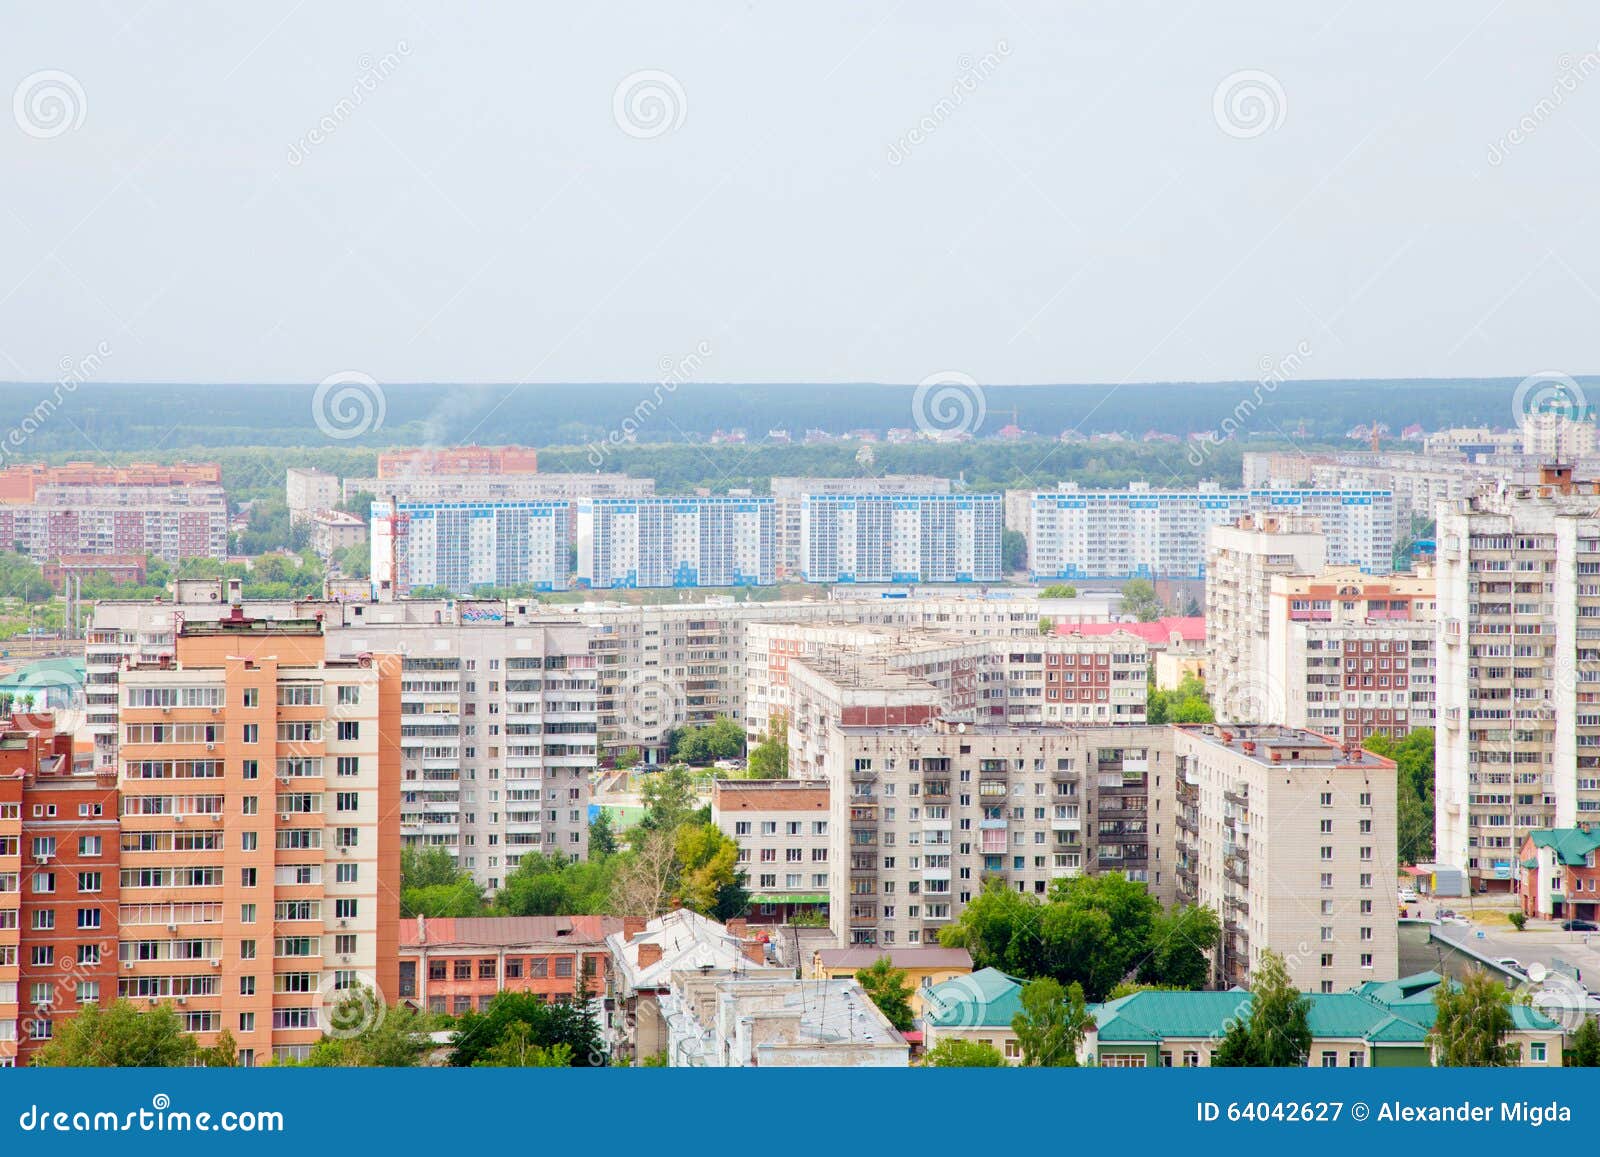 The City Of Siberia Novosibirsk Editorial Photography Image Of